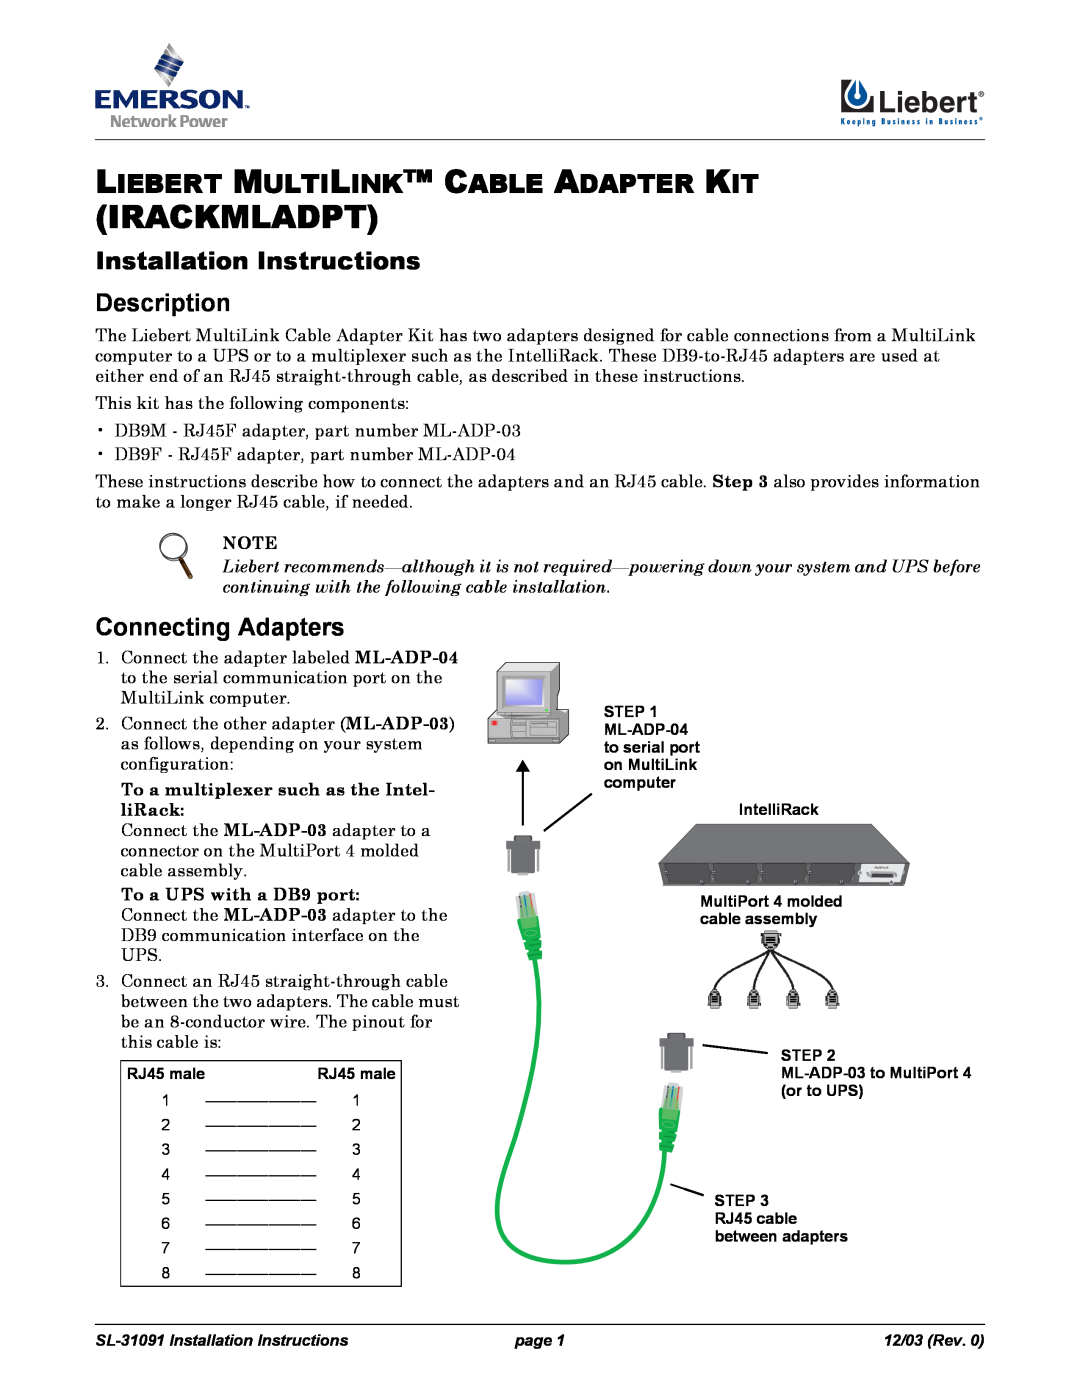 Emerson SL-31091 installation instructions Irackmladpt, Liebert Multilink Cable Adapter Kit, Connecting Adapters 